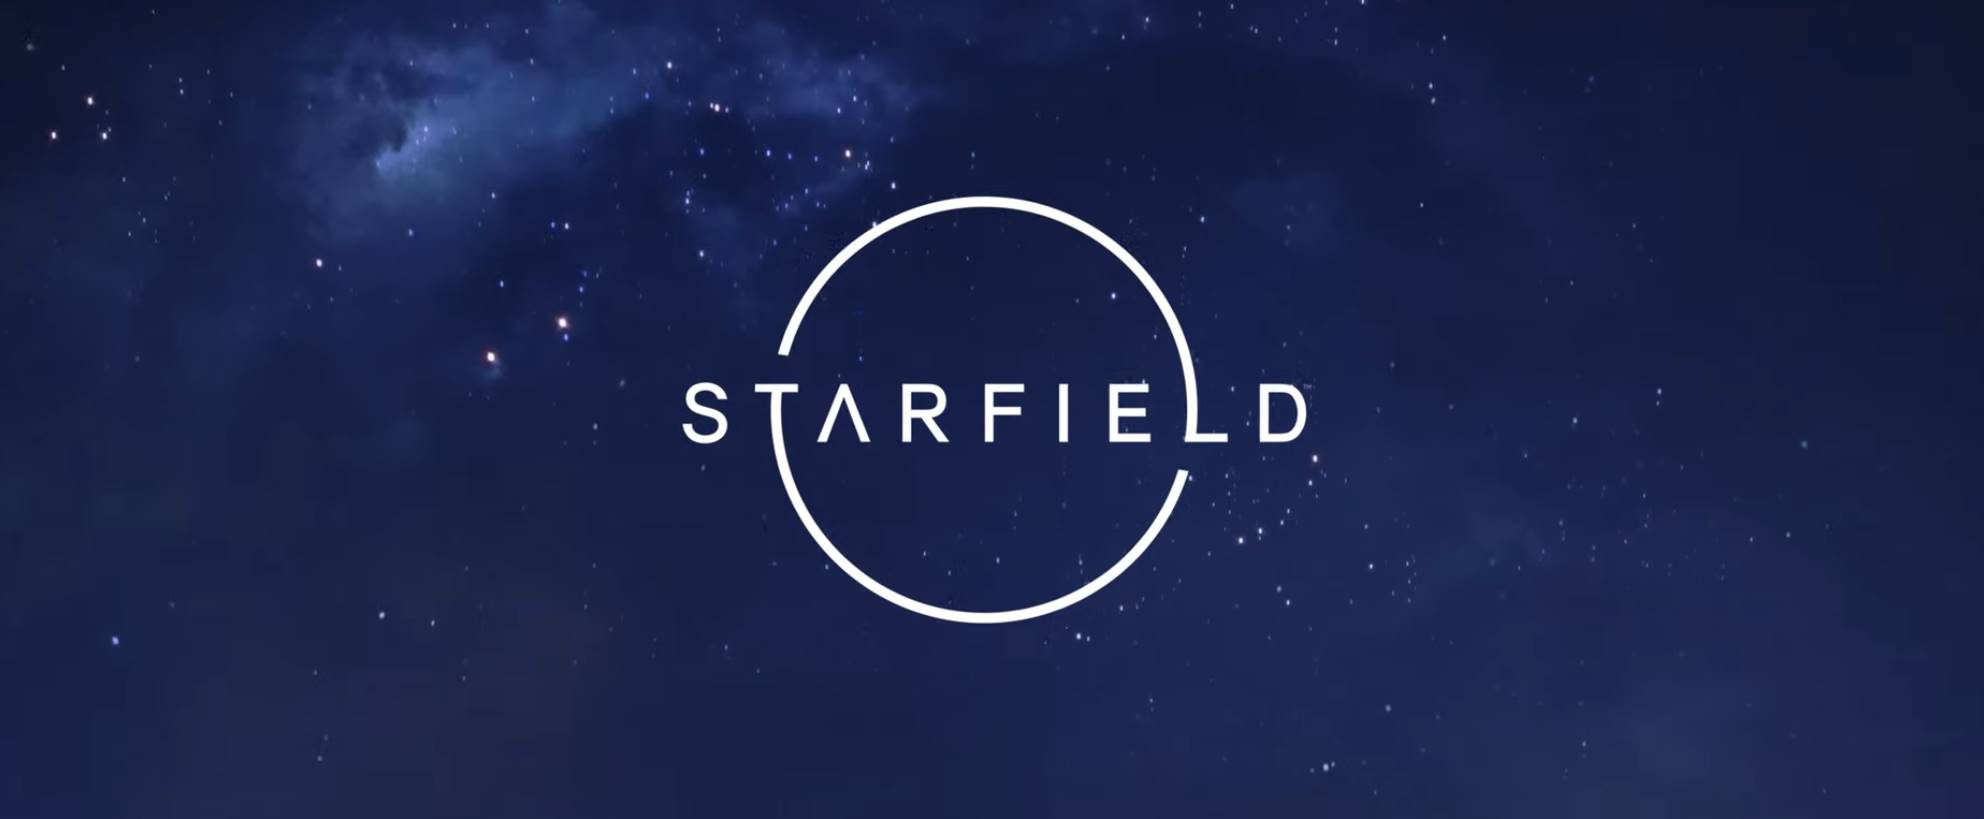 Starfield - Trailer live-action ufficiale 